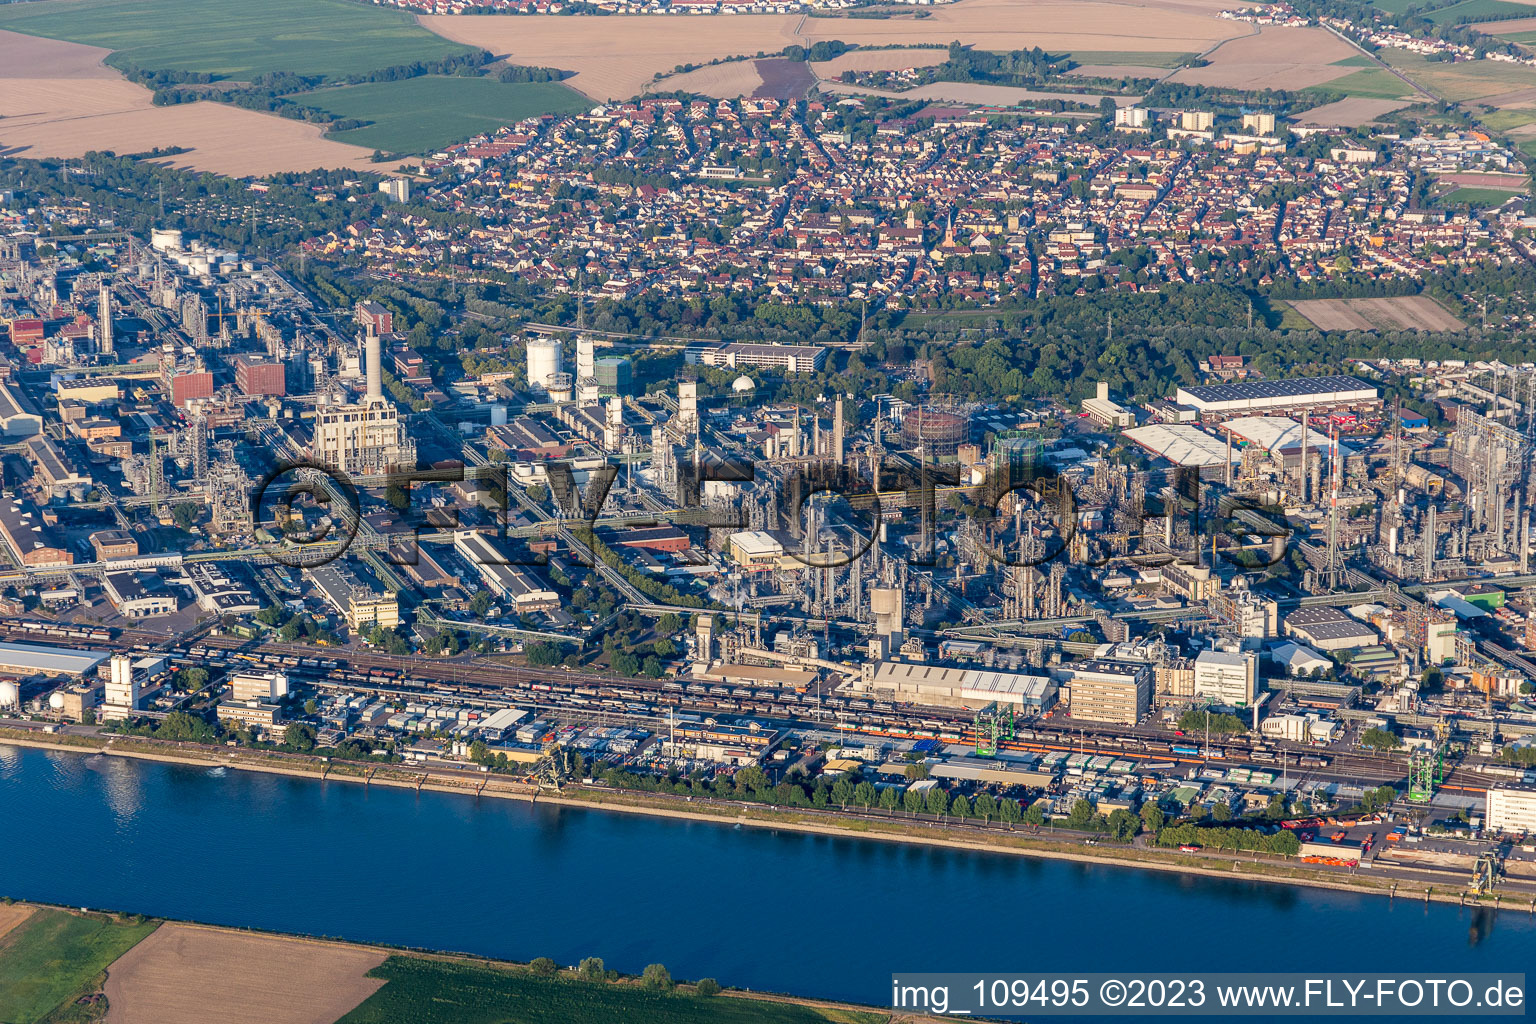 District BASF in Ludwigshafen am Rhein in the state Rhineland-Palatinate, Germany from above